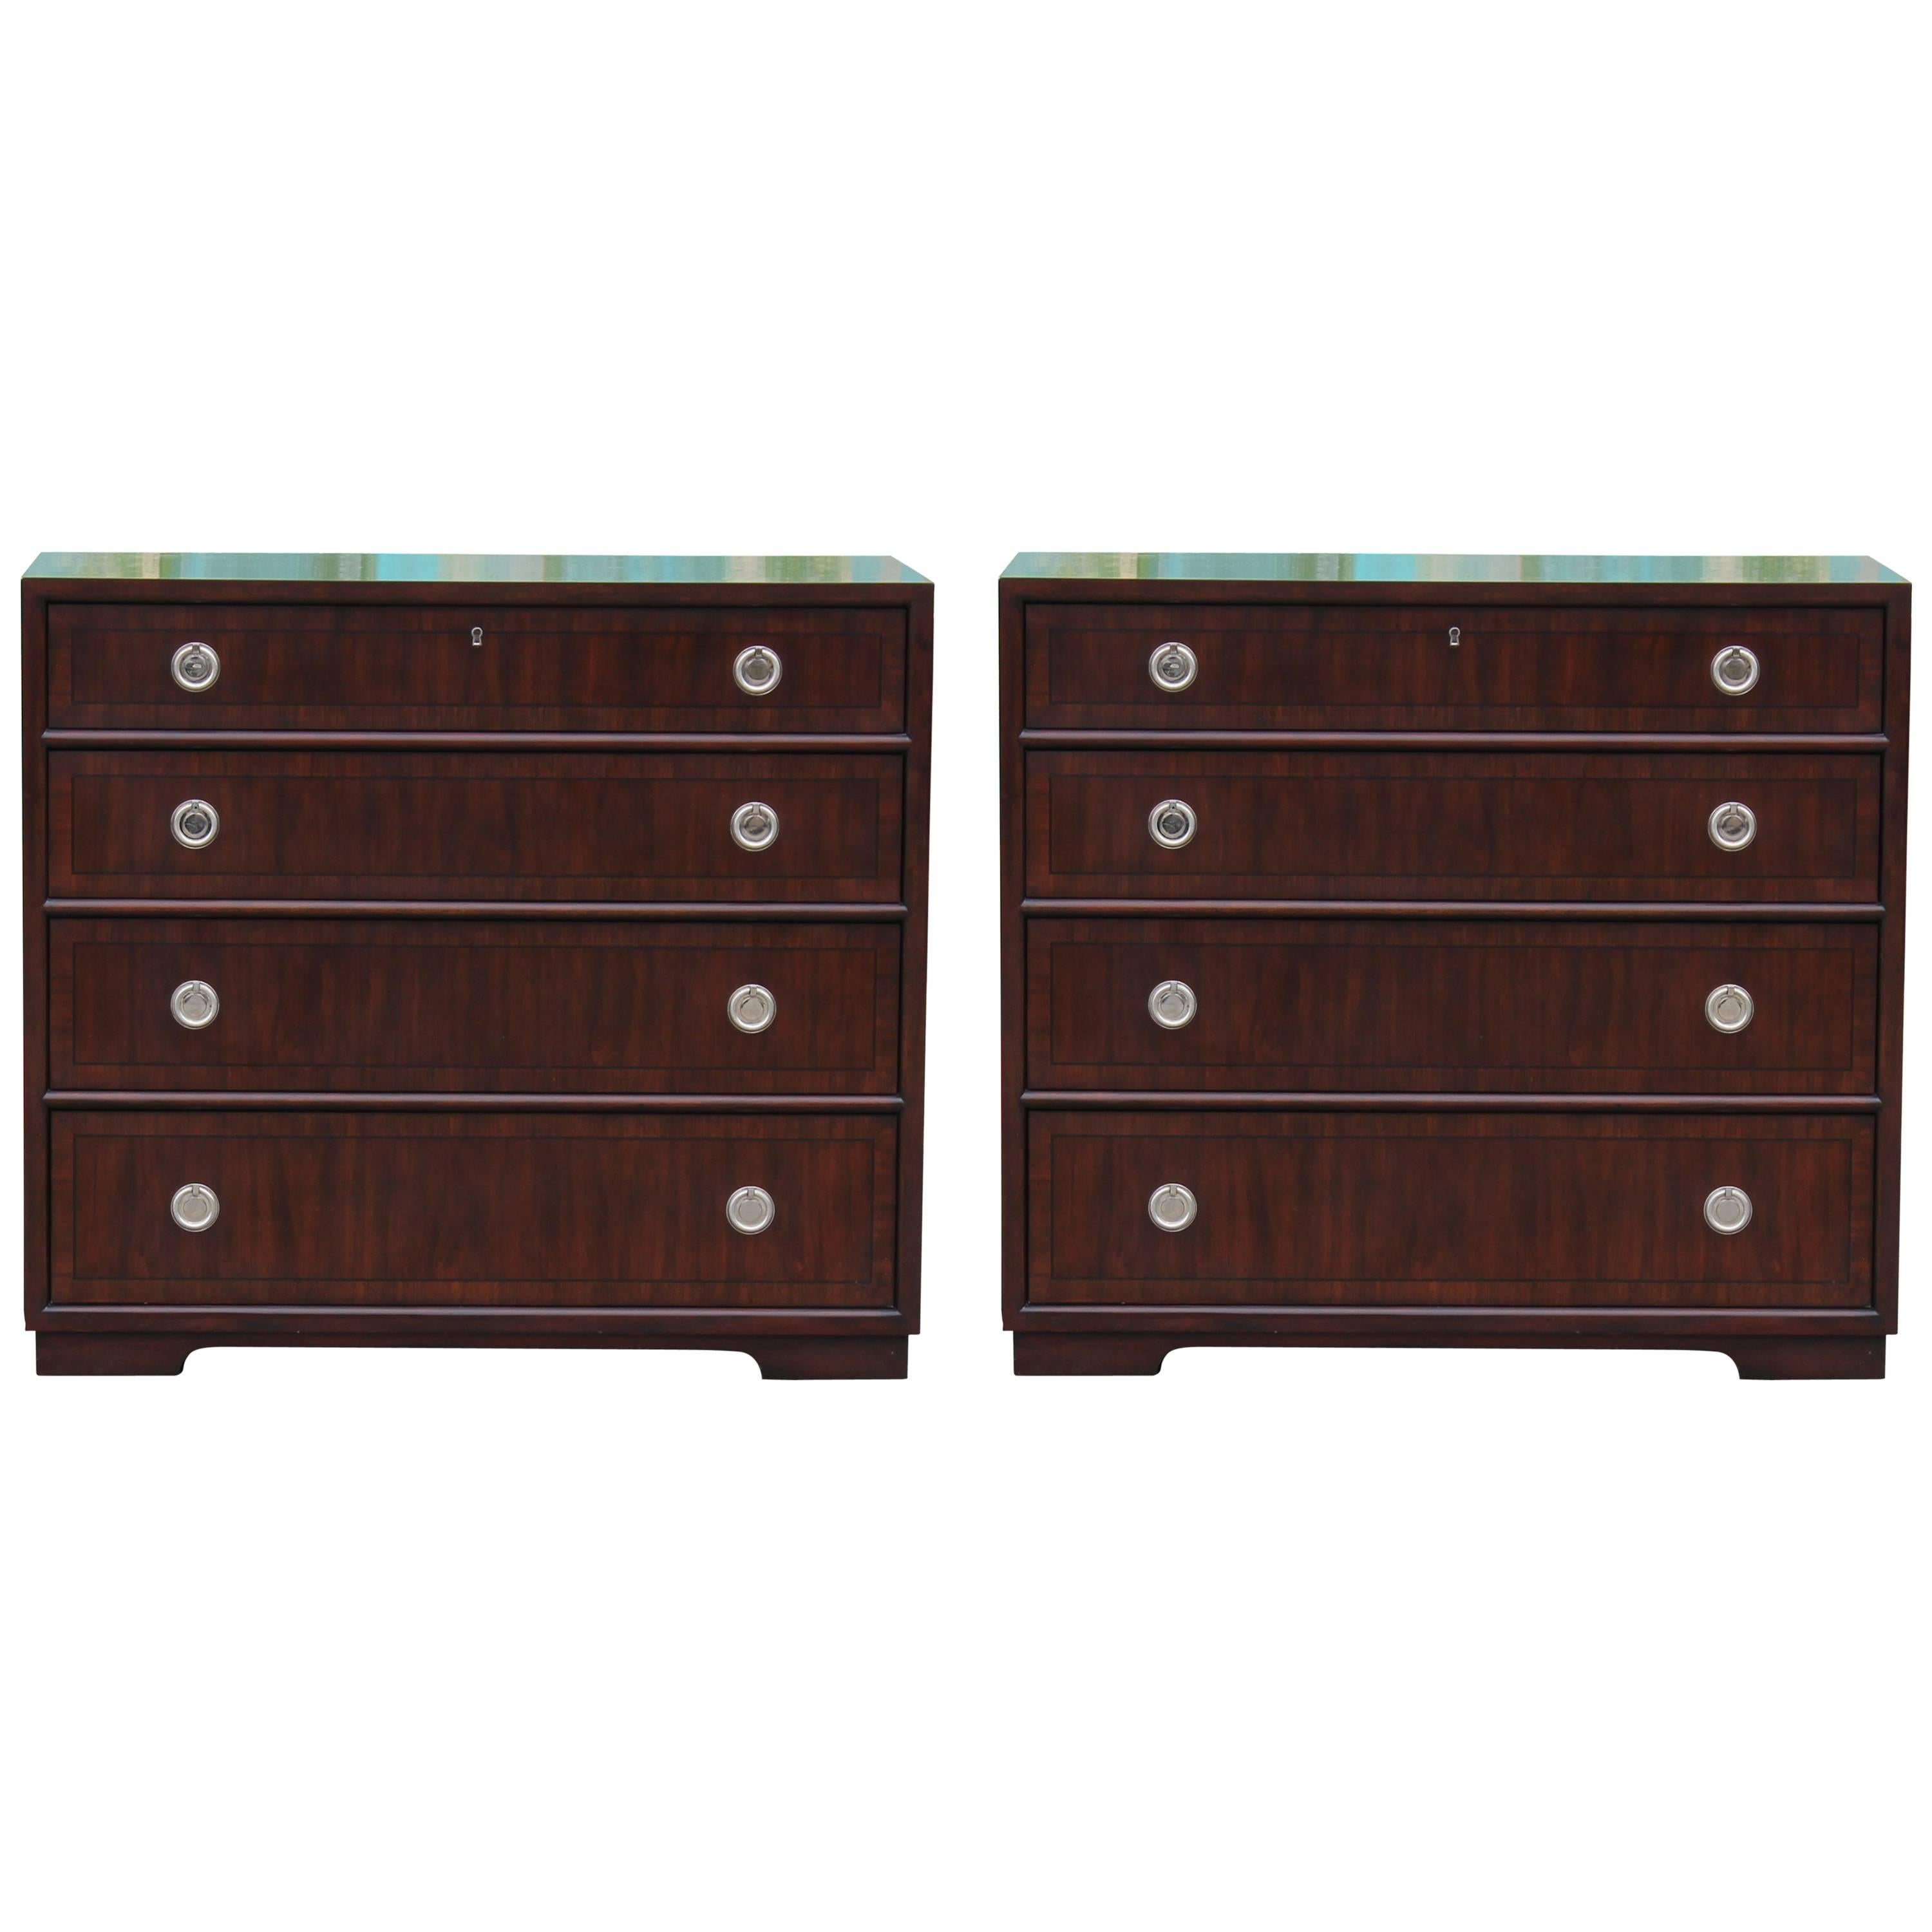 Pair of Modern Walnut Henredon Bachelor's Chest with Silver Ring Pulls